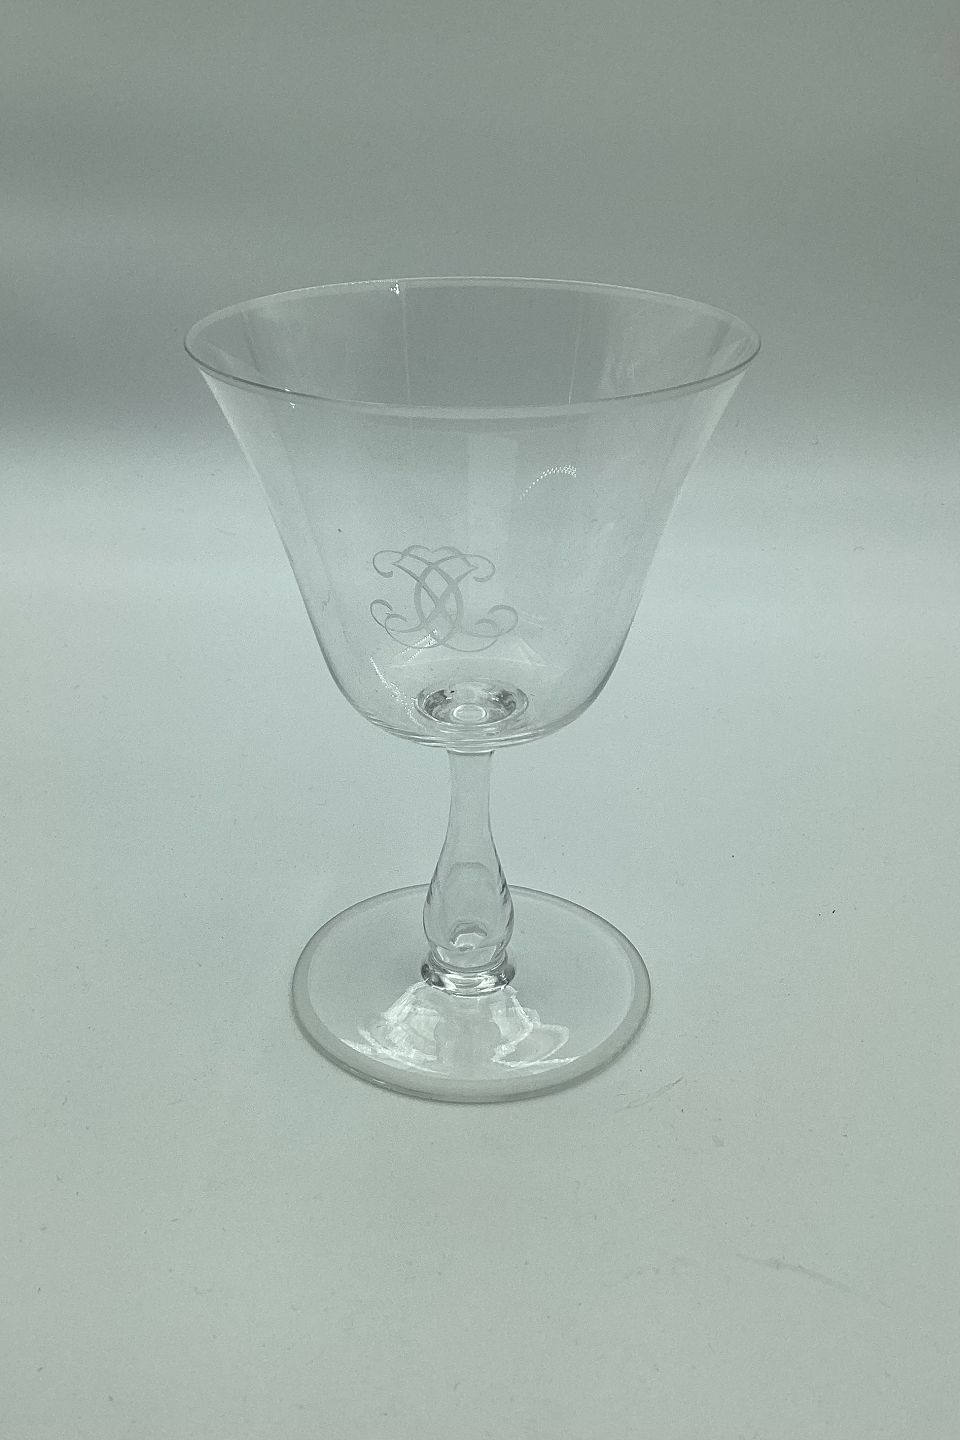  Wine glass with monogram on bell-shaped basin and hollow  stem